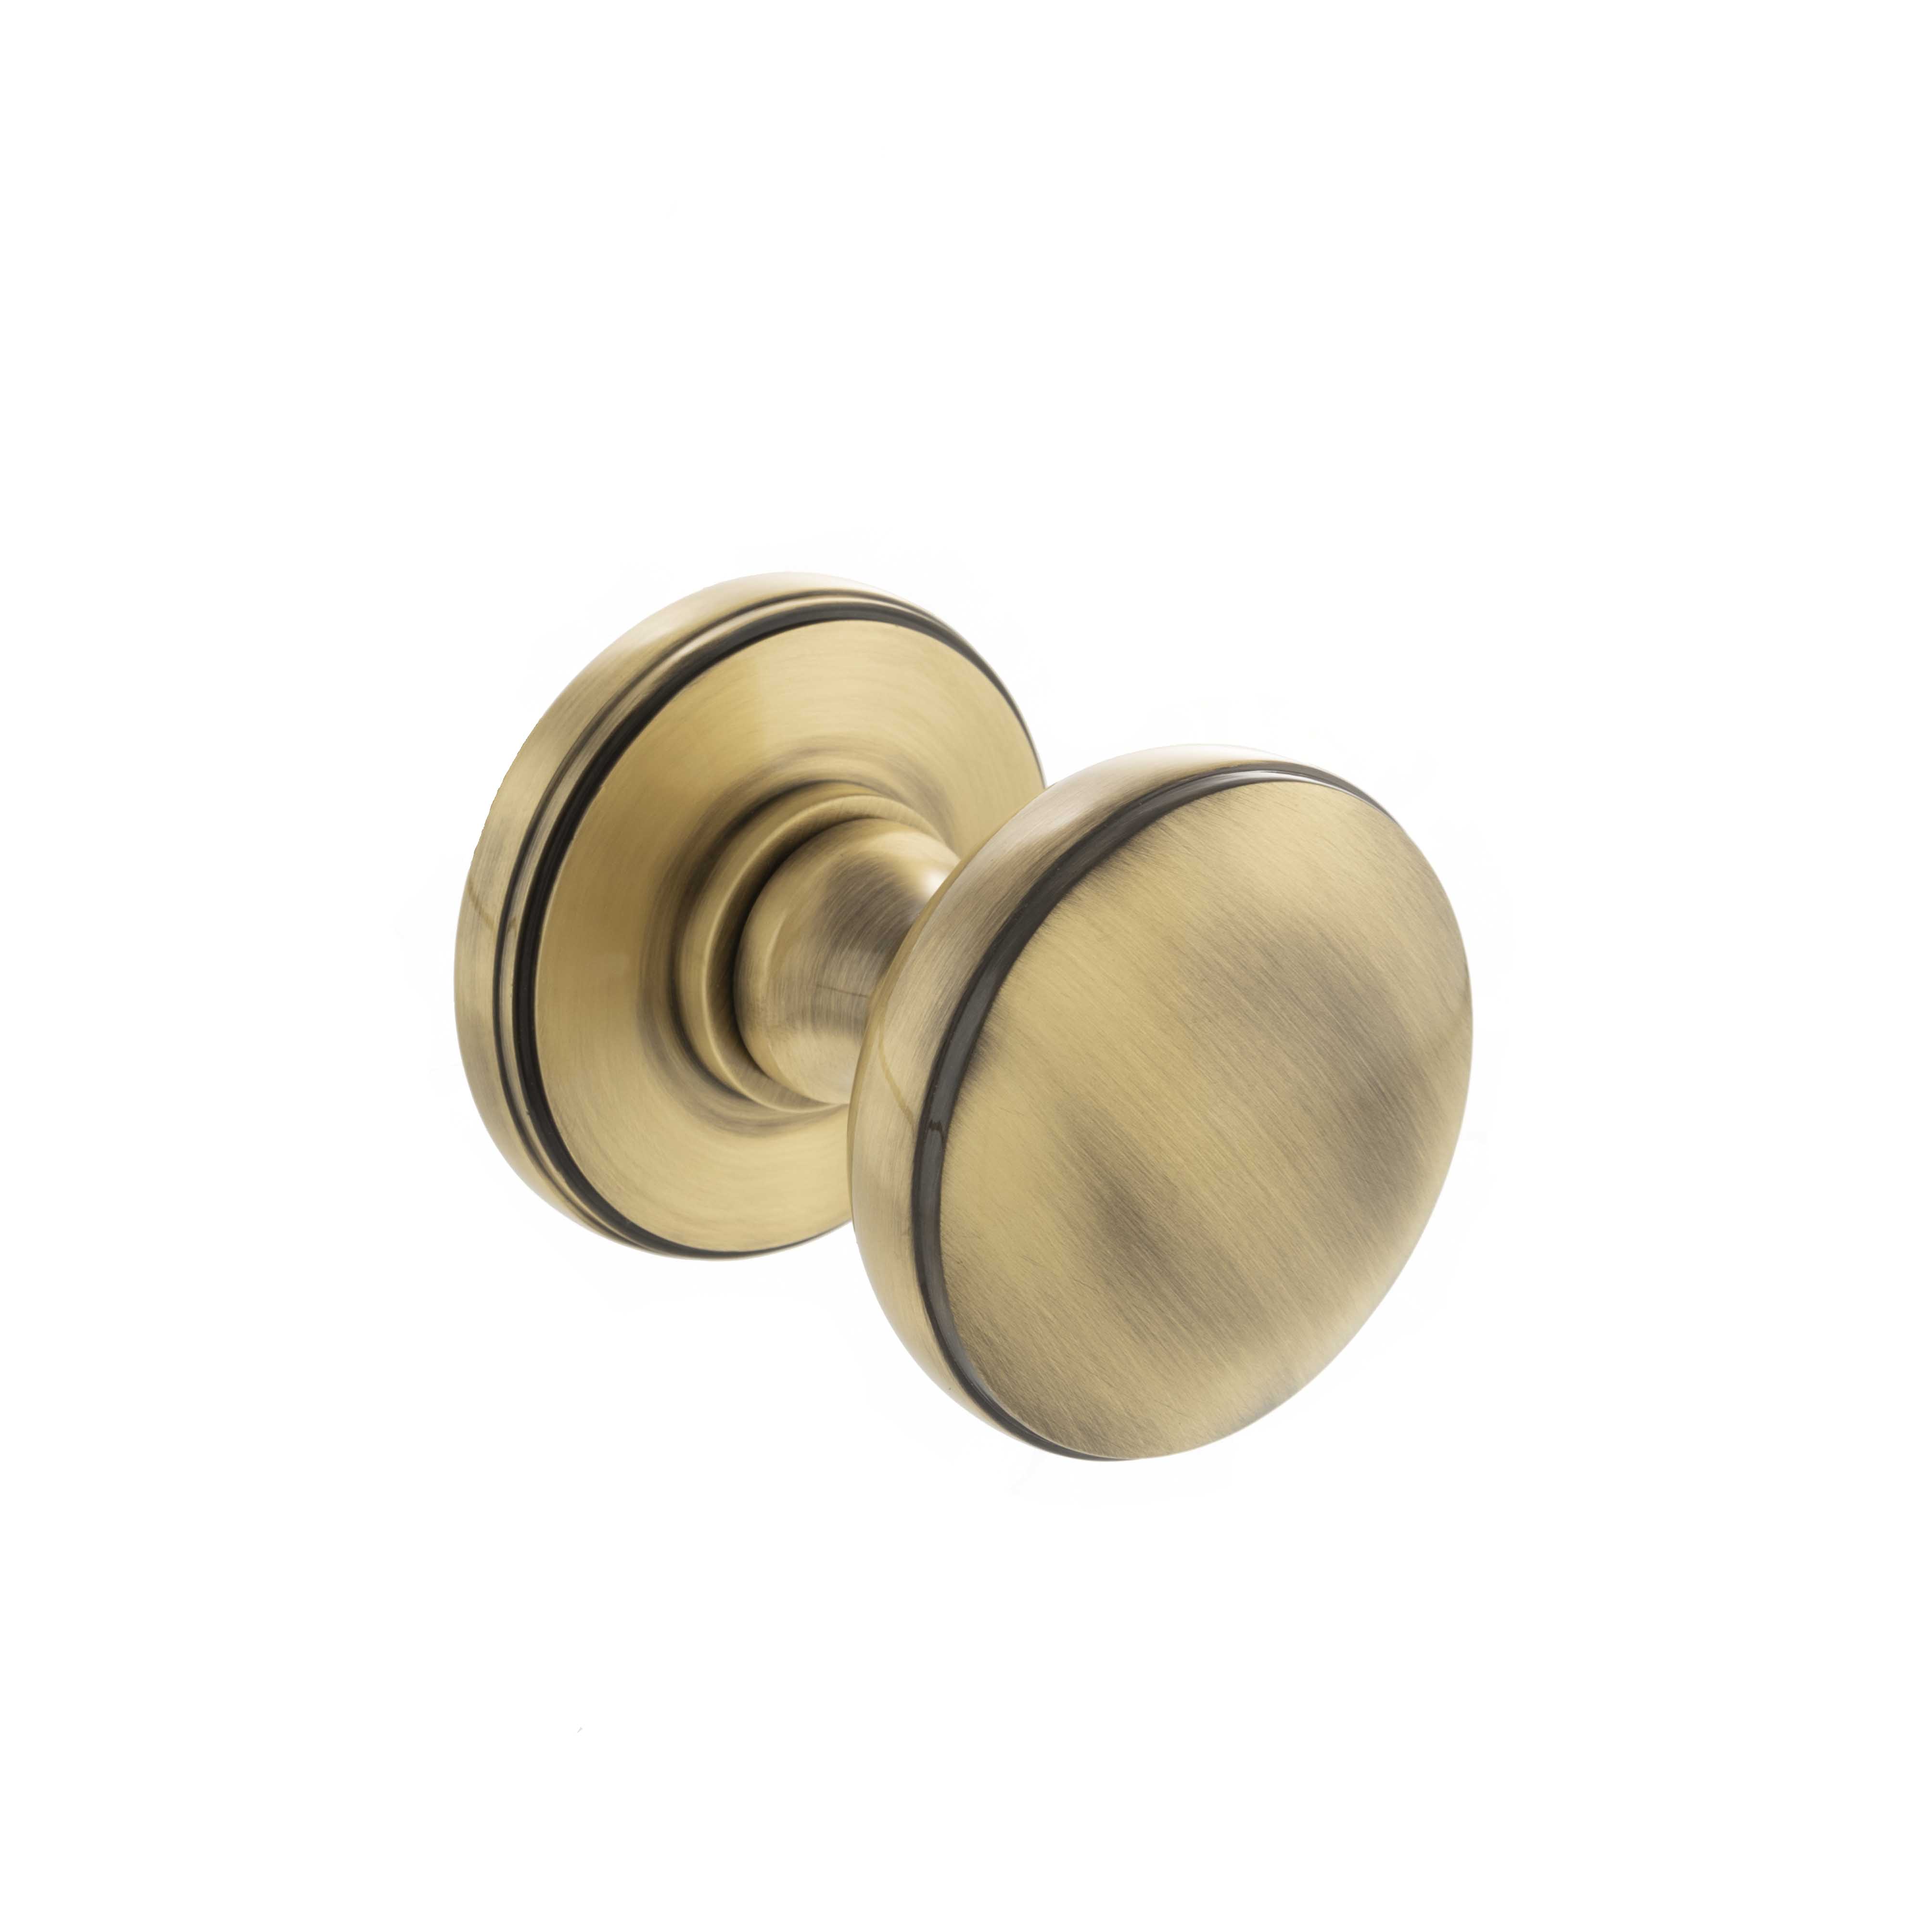 Millhouse Edison Solid Domed Mortice Knob on Concealed Fix Rose